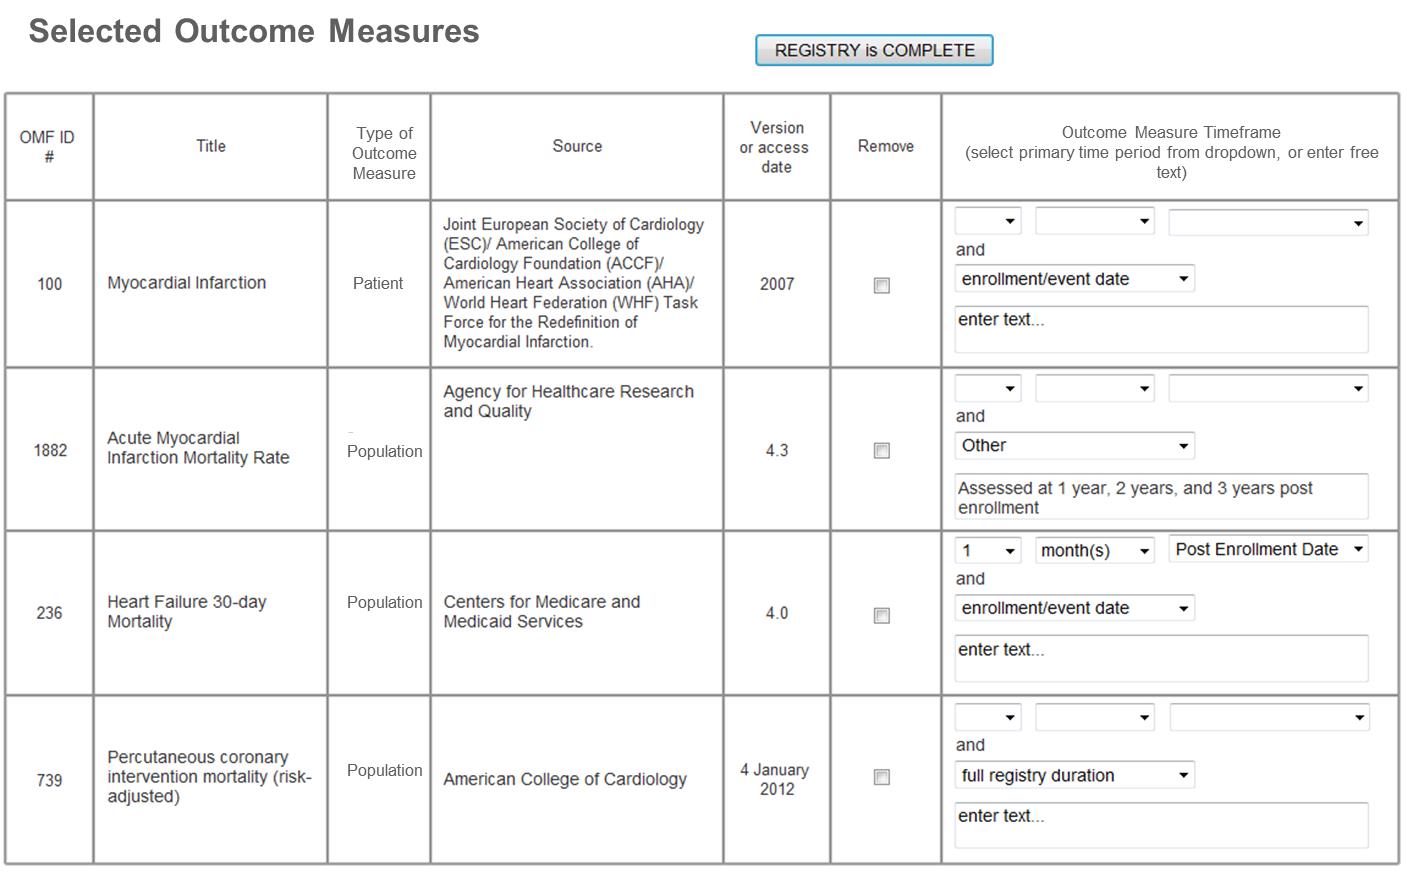 This shows an image mock-up of a complete record identifying timeframes for selected outcome measures, as a user of the RoPR might see it. At the top is a button to indicate 'Registry is Complete', as this page shows the outcome measures already selected by the RoPR user. The selections already made by the users show an OMF ID #, Title, Type, Source, and Version or access date. There is also a column labelled Remove which contains checkboxes that could allow removal of selections. There is another column labelled 'Outcome Measure Timeframe (select primary time period from dropdown, or enter free text), which includes a dropdown menu and free text field for each OMF selection.